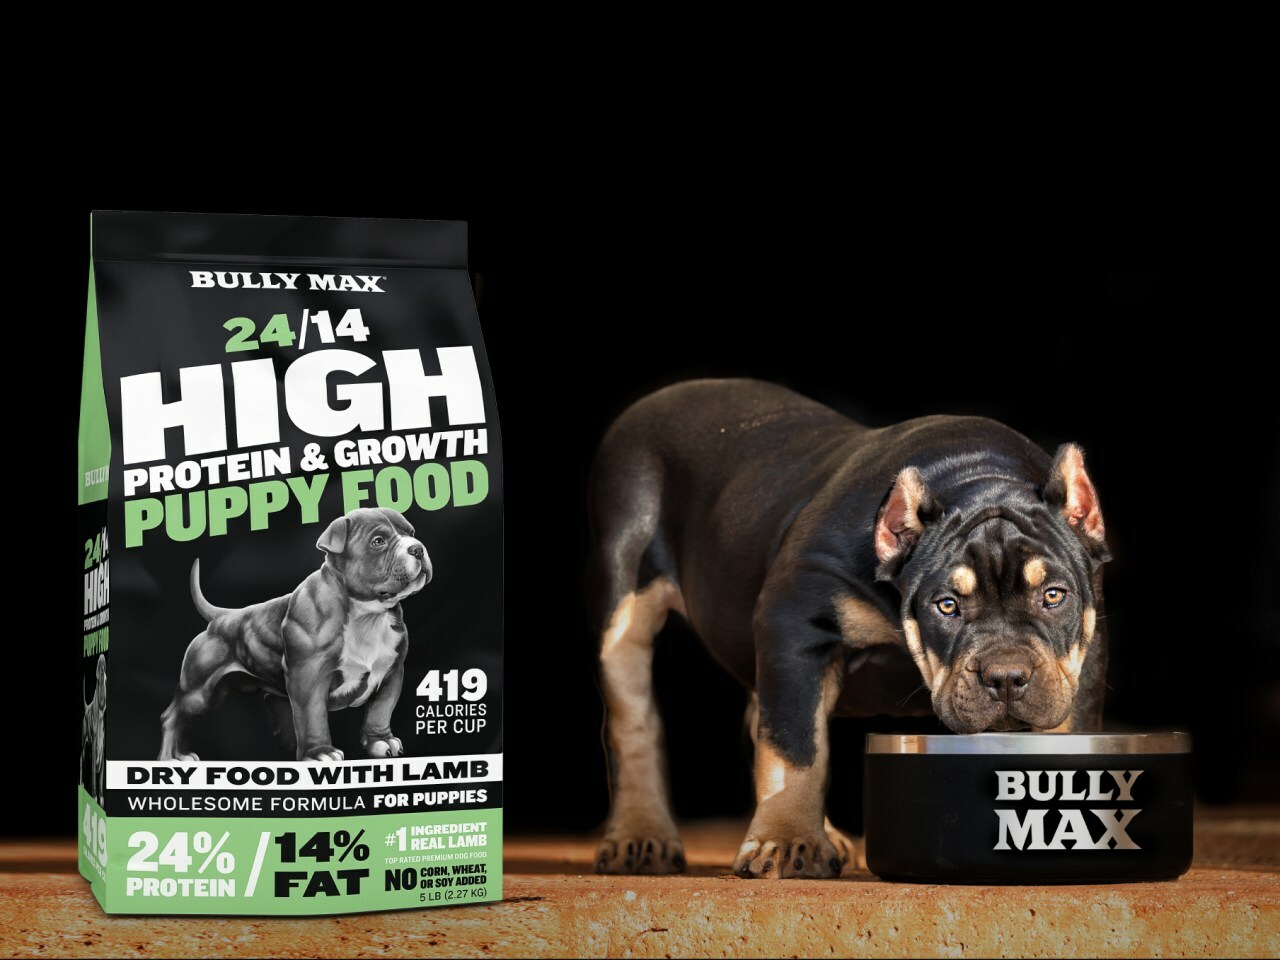 Bully Max Introduces New Puppy Food Formula with TruMune for Optimal Gut Health and Nutrient Preservation